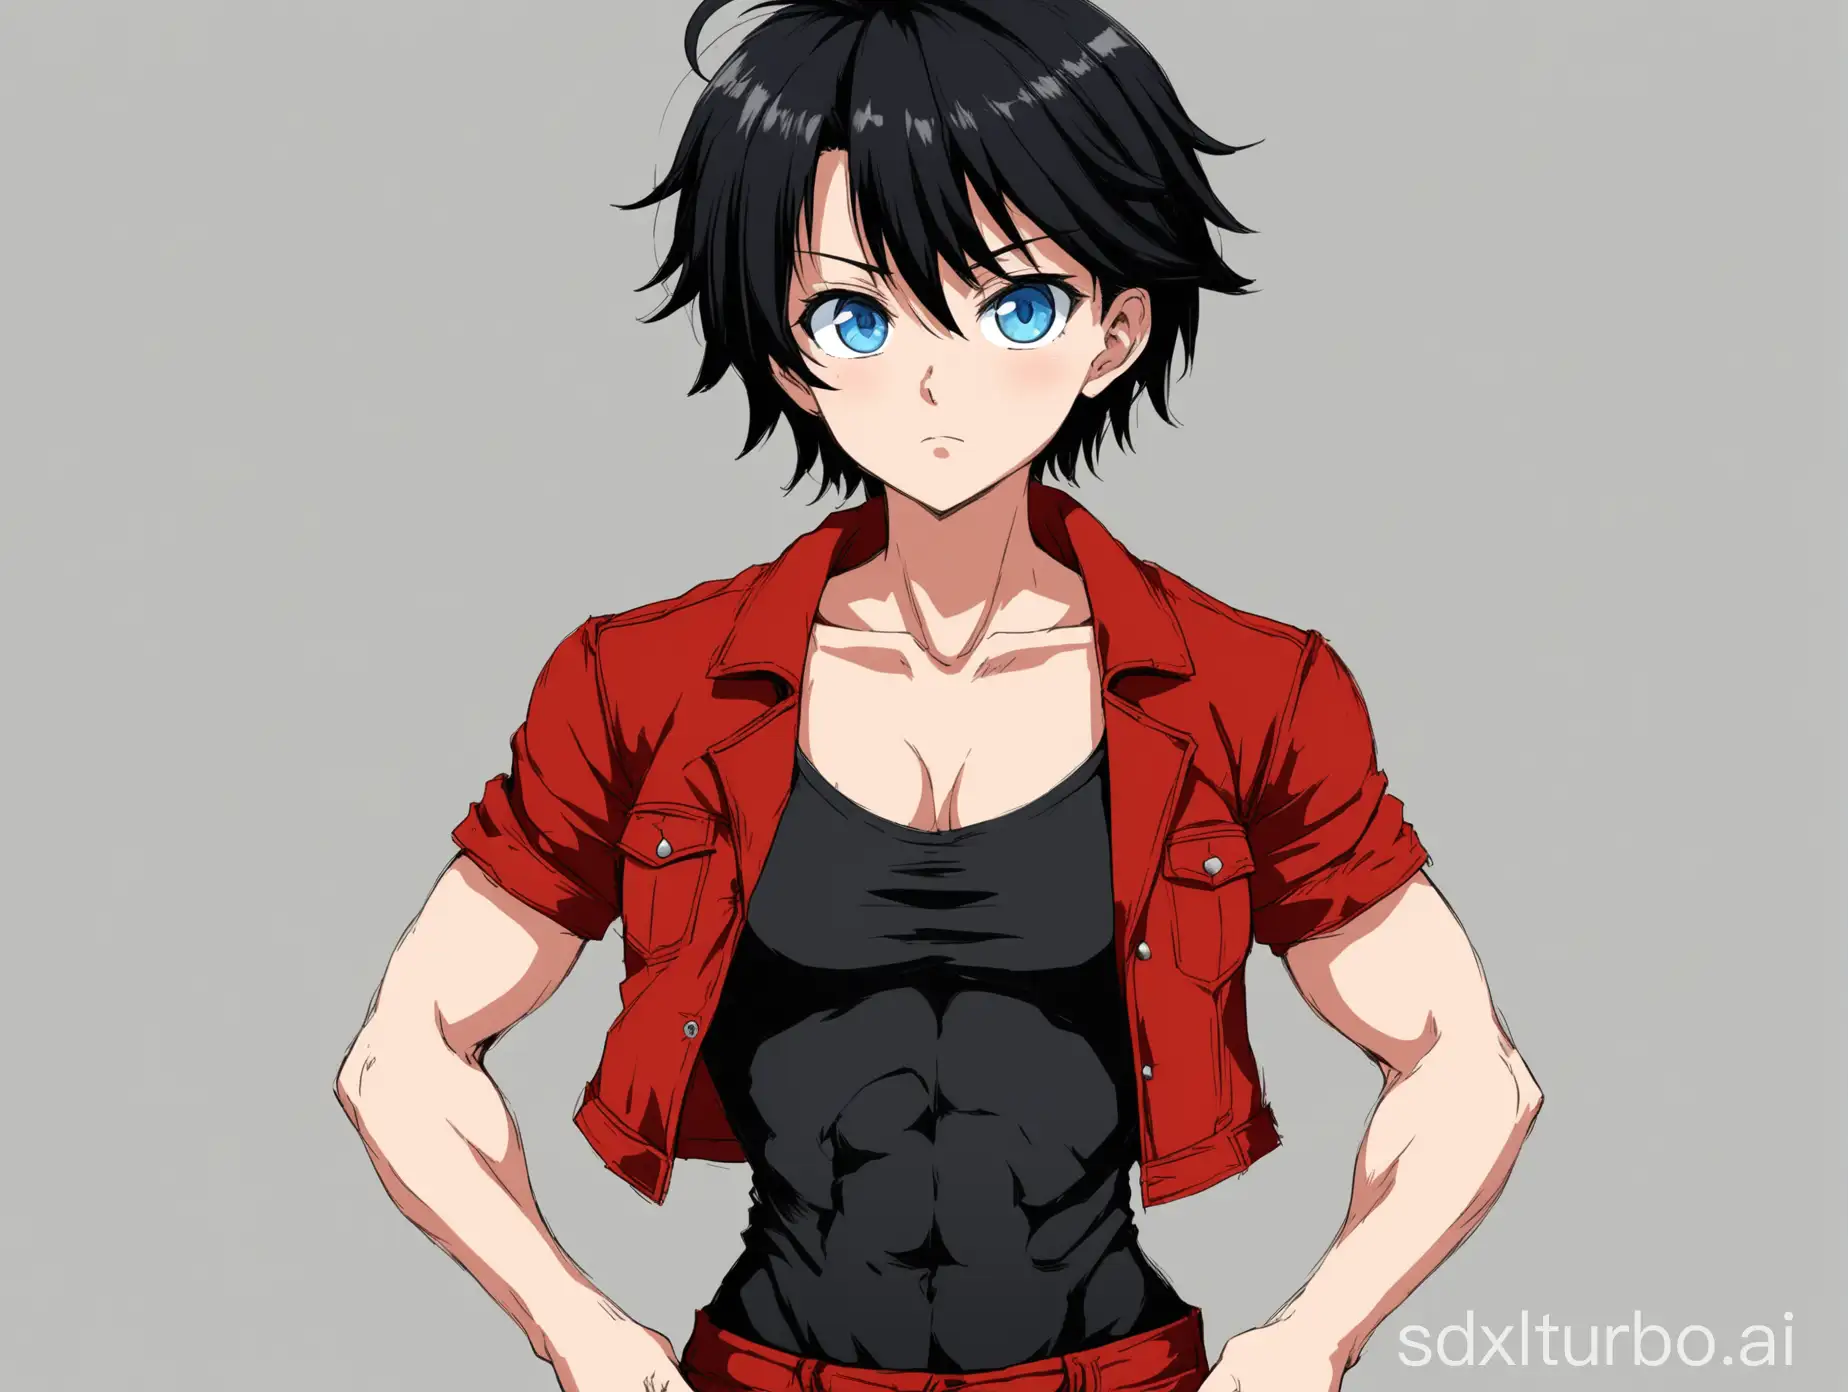 Anime-Style-Tomboy-with-Red-Jacket-and-Blue-Eyes